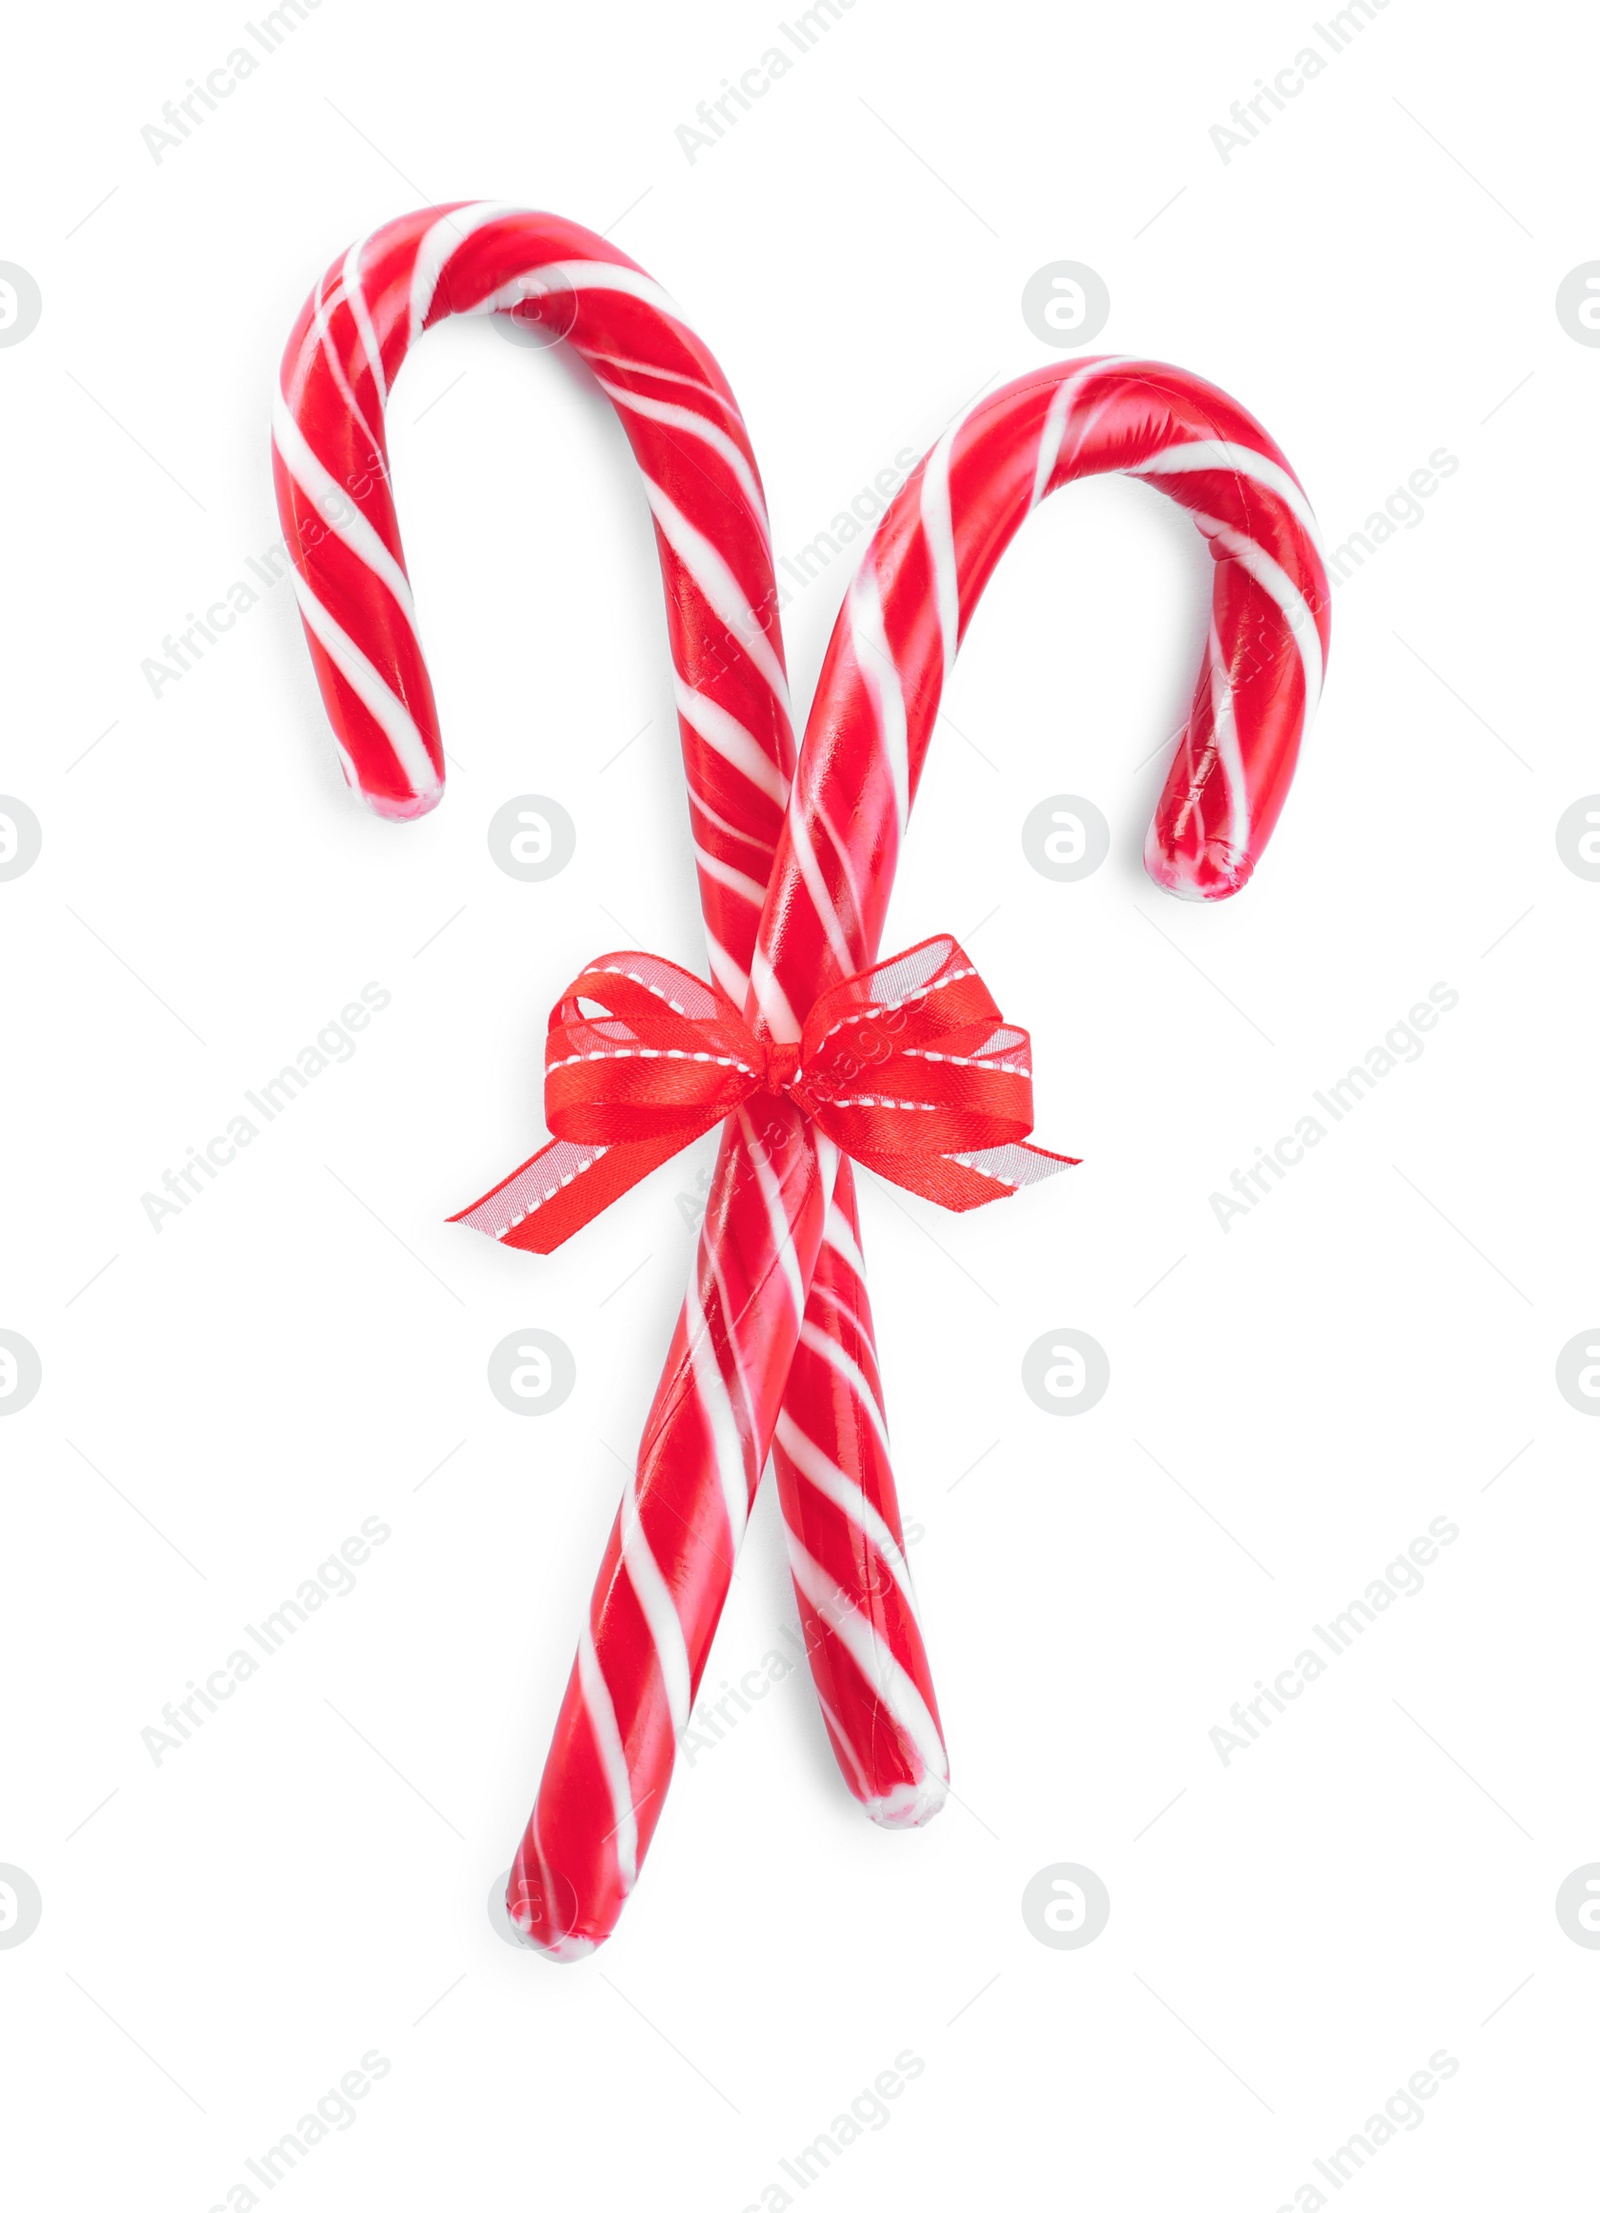 Photo of Sweet Christmas candy canes with red bow on white background, top view